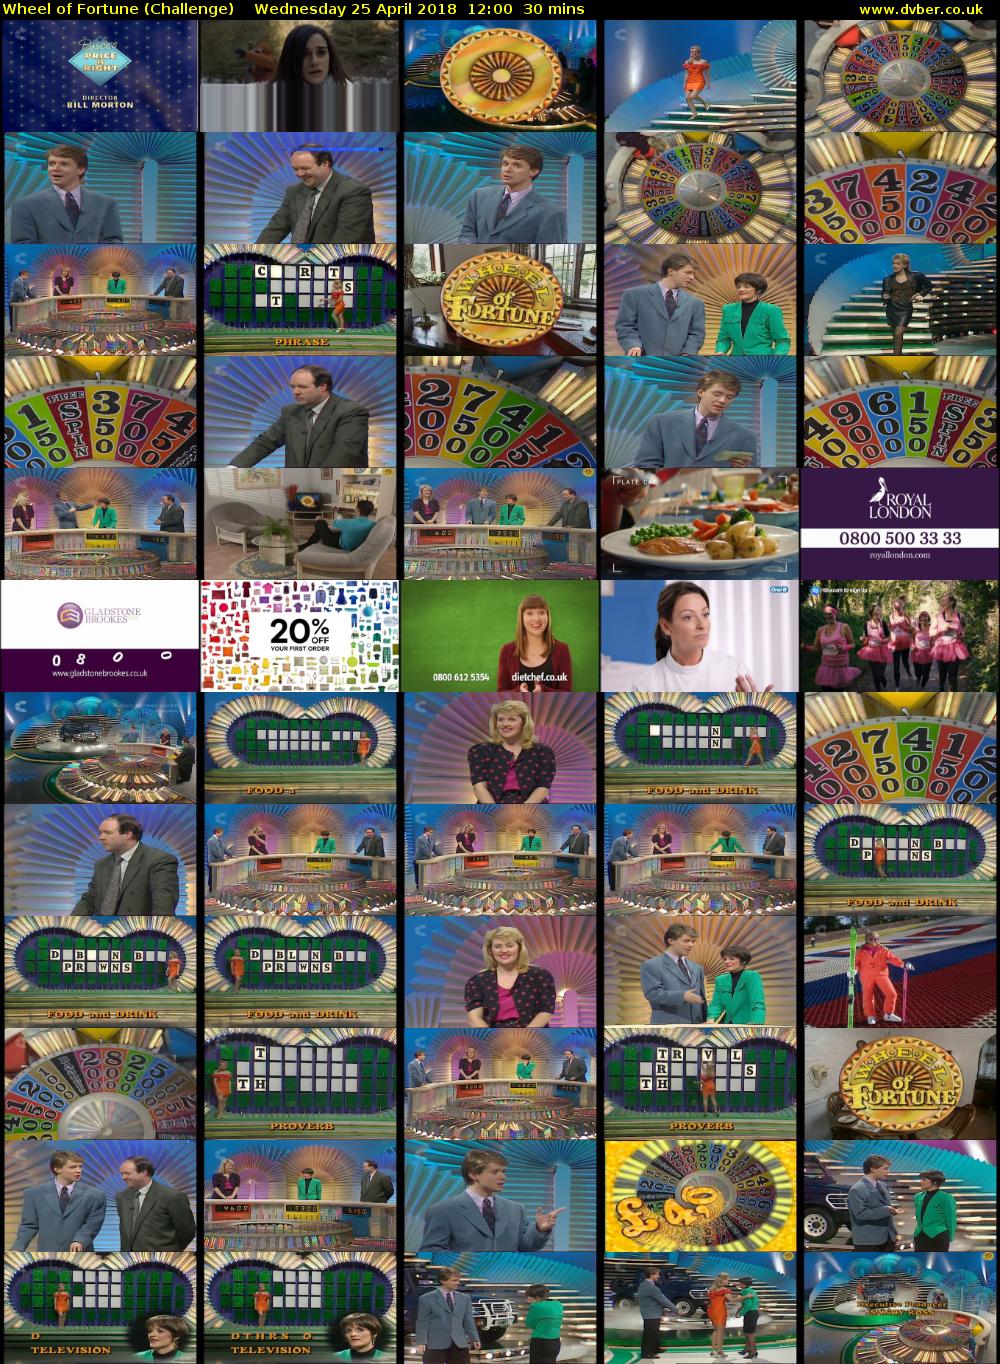 Wheel of Fortune (Challenge) Wednesday 25 April 2018 12:00 - 12:30